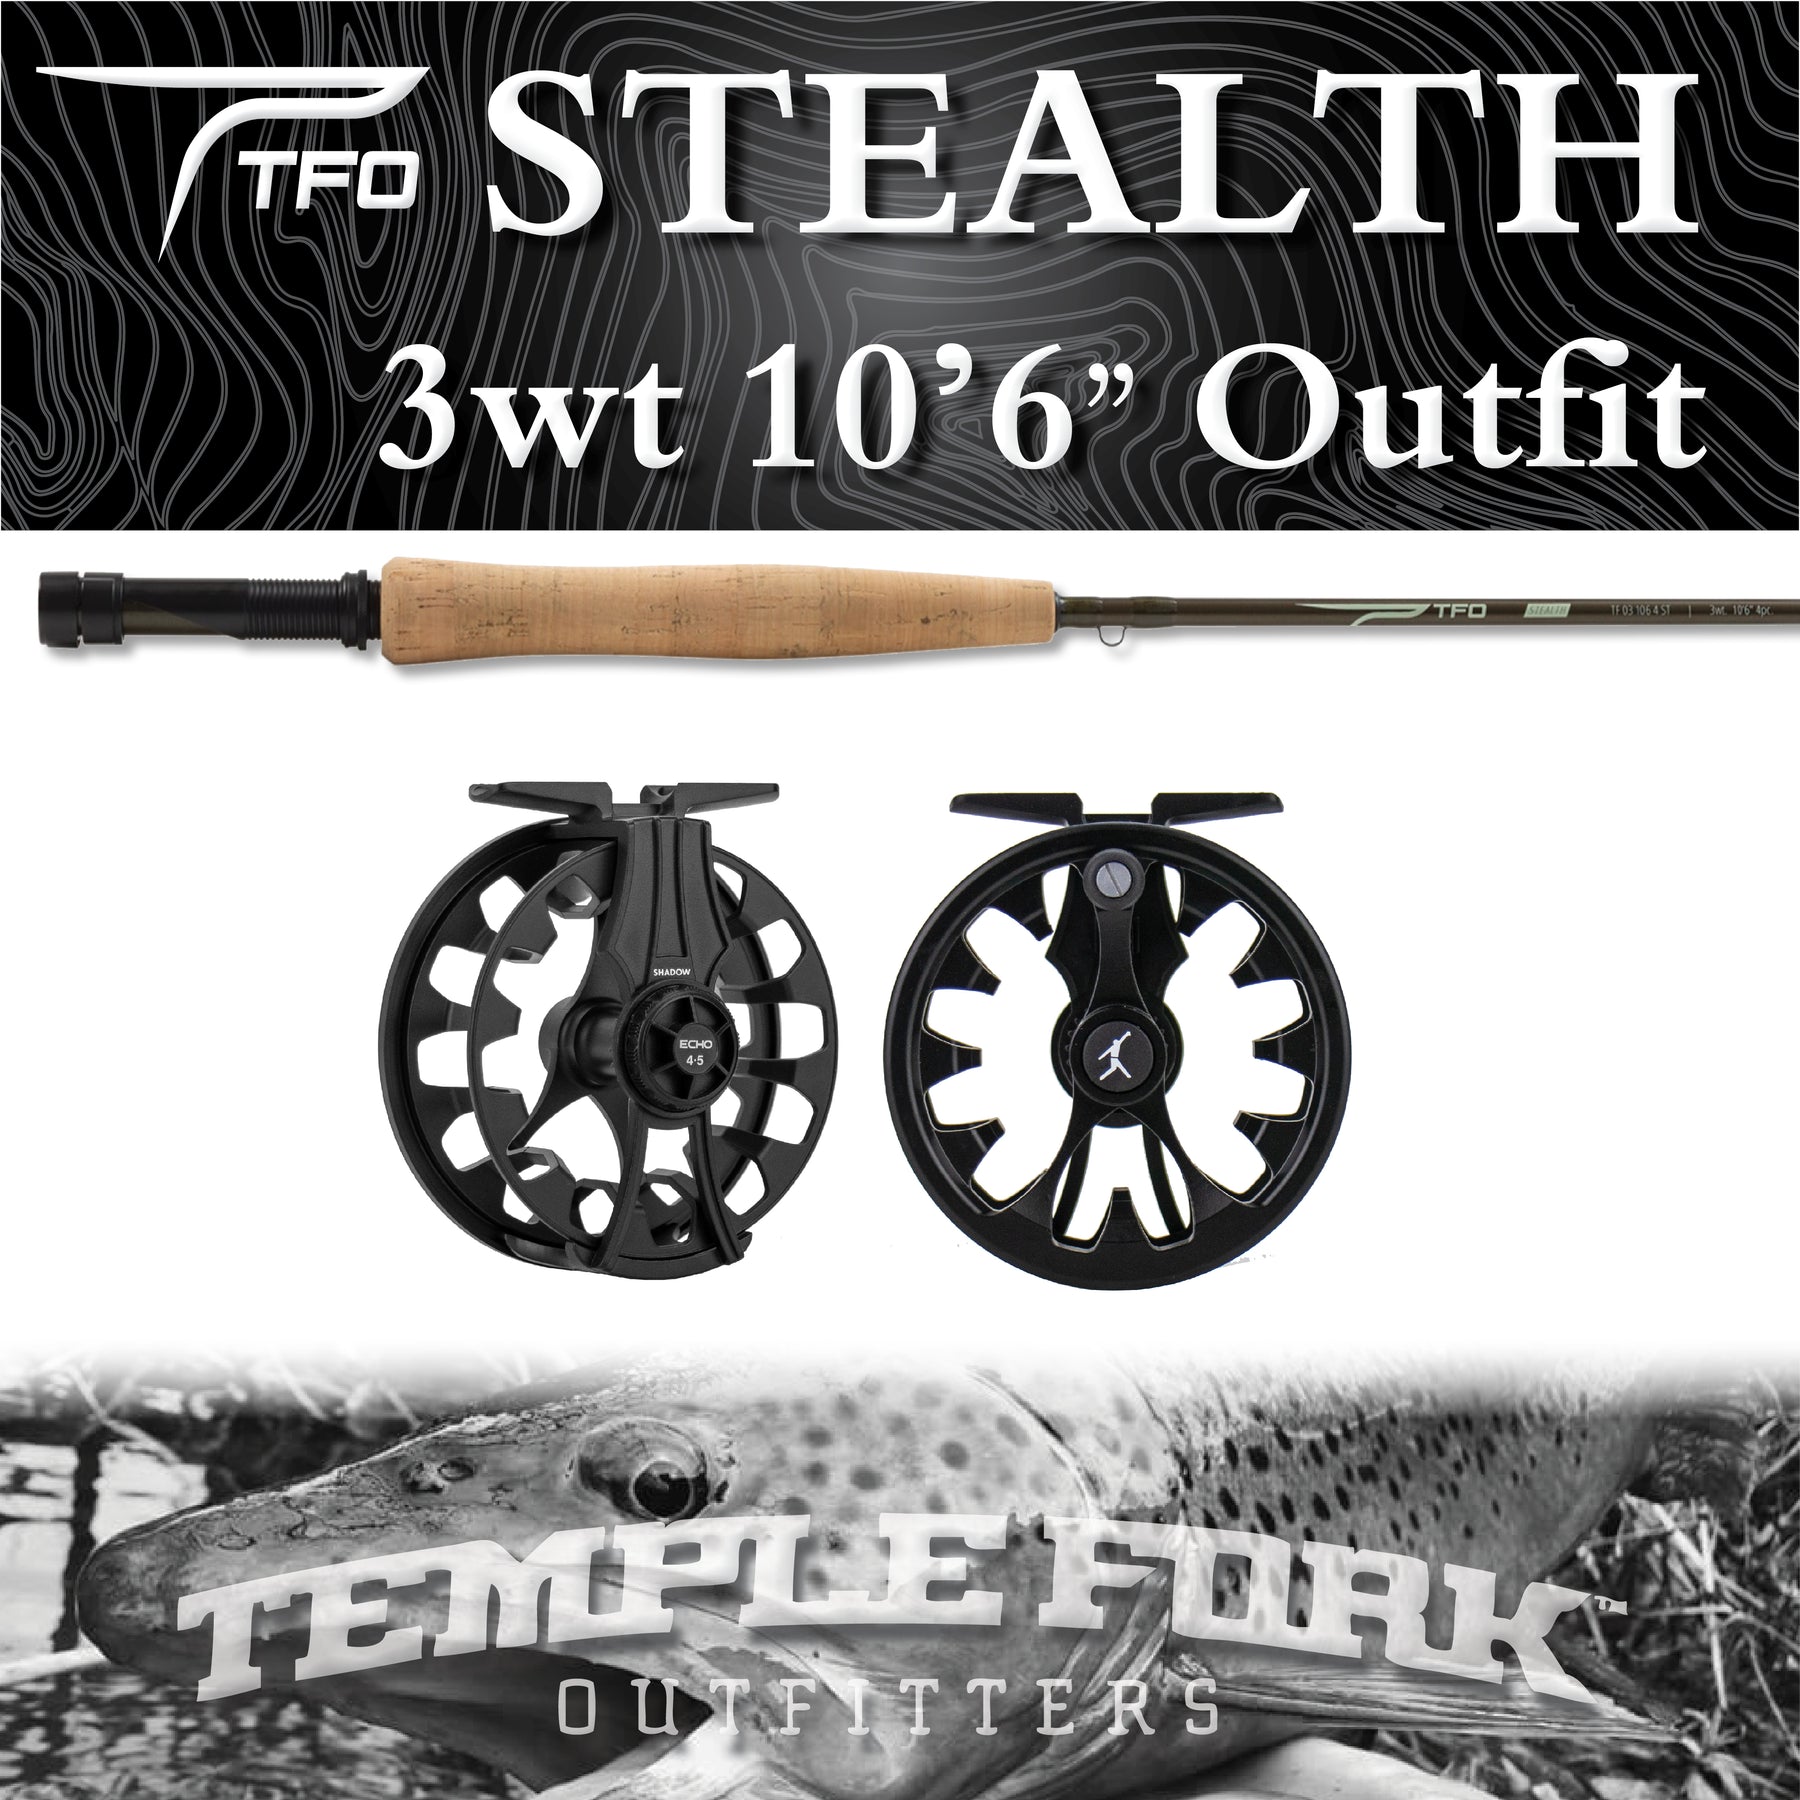 TFO Stealth Euro Nymph 3wt 10'6 – Raft & Fly Shop